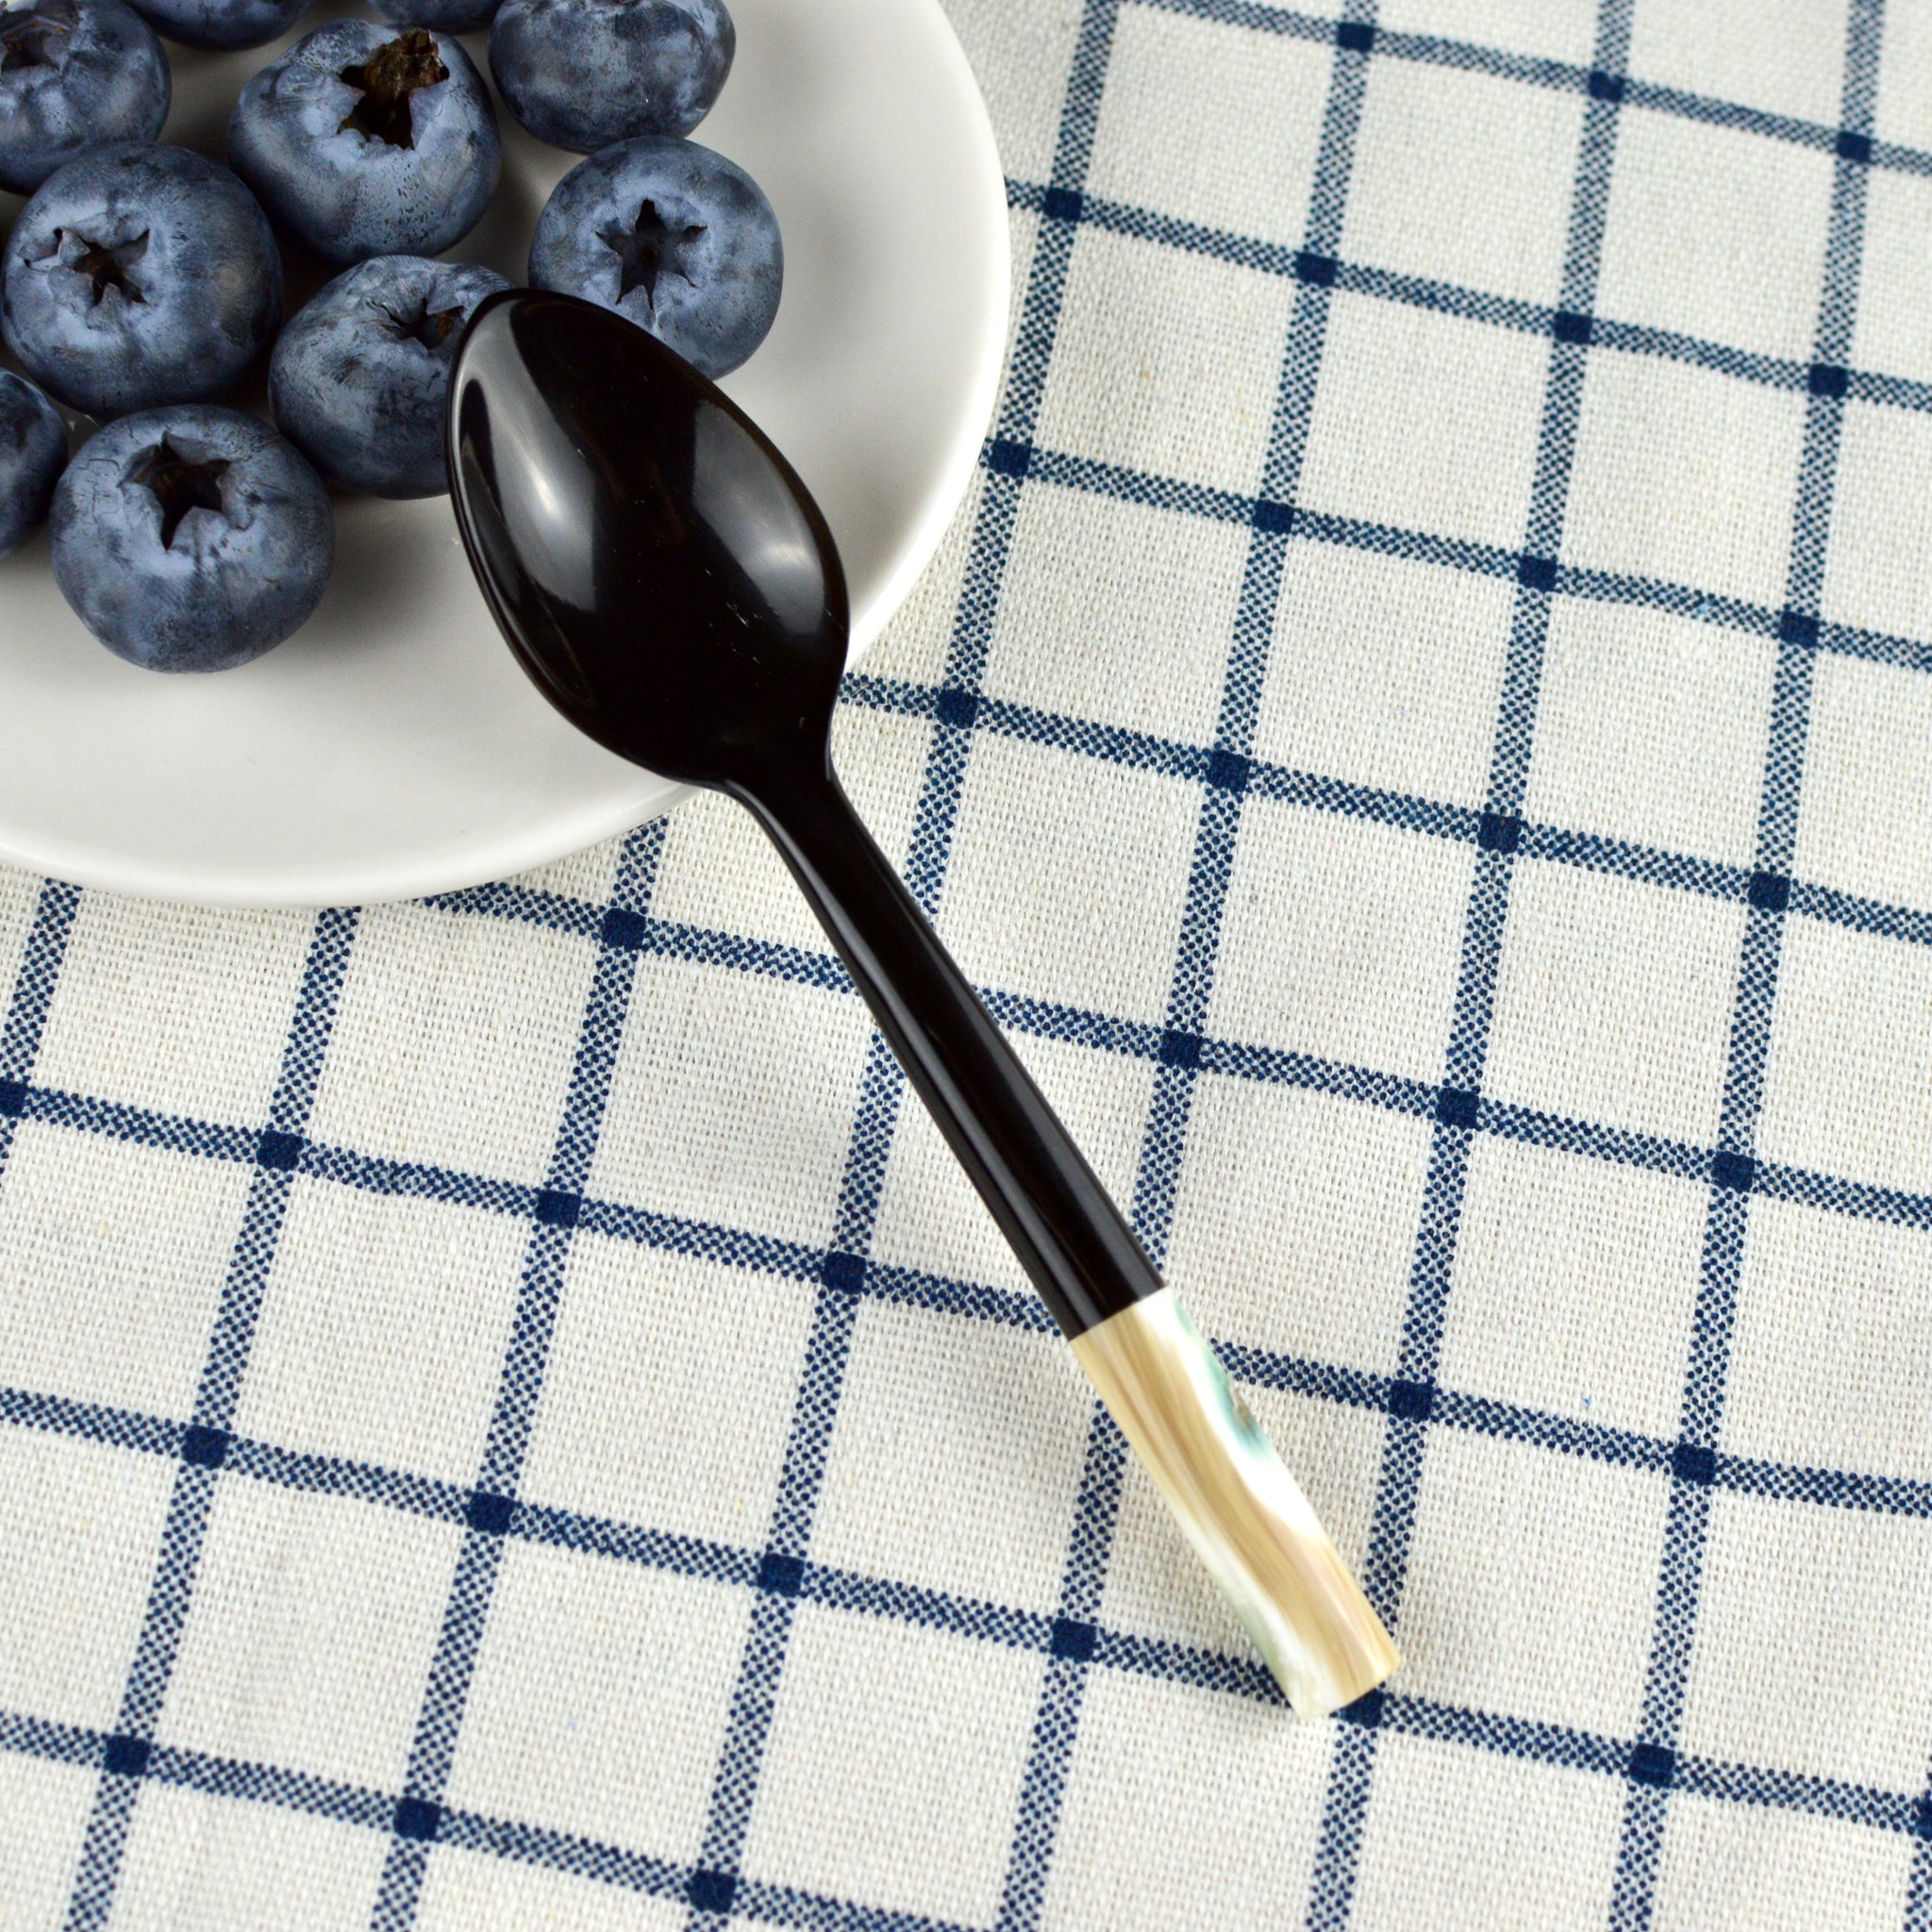 Horn Spoon and Fork Set